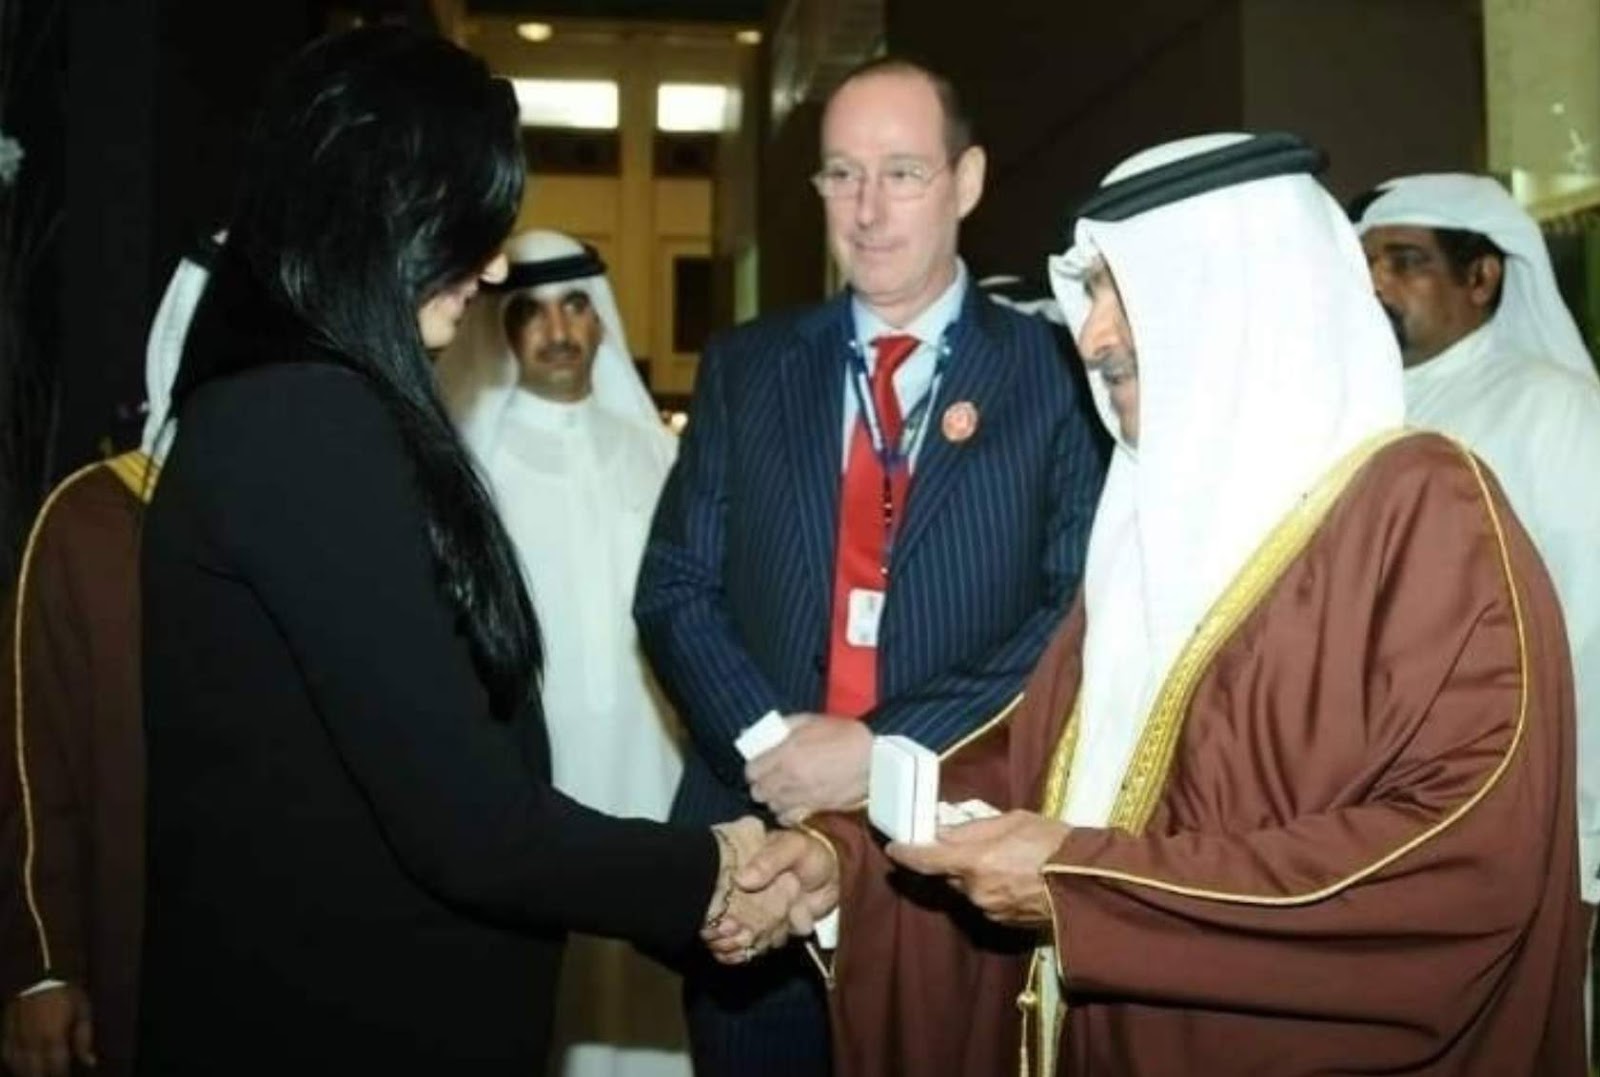 Maria Adela with the former Prime Minister of Bahrain